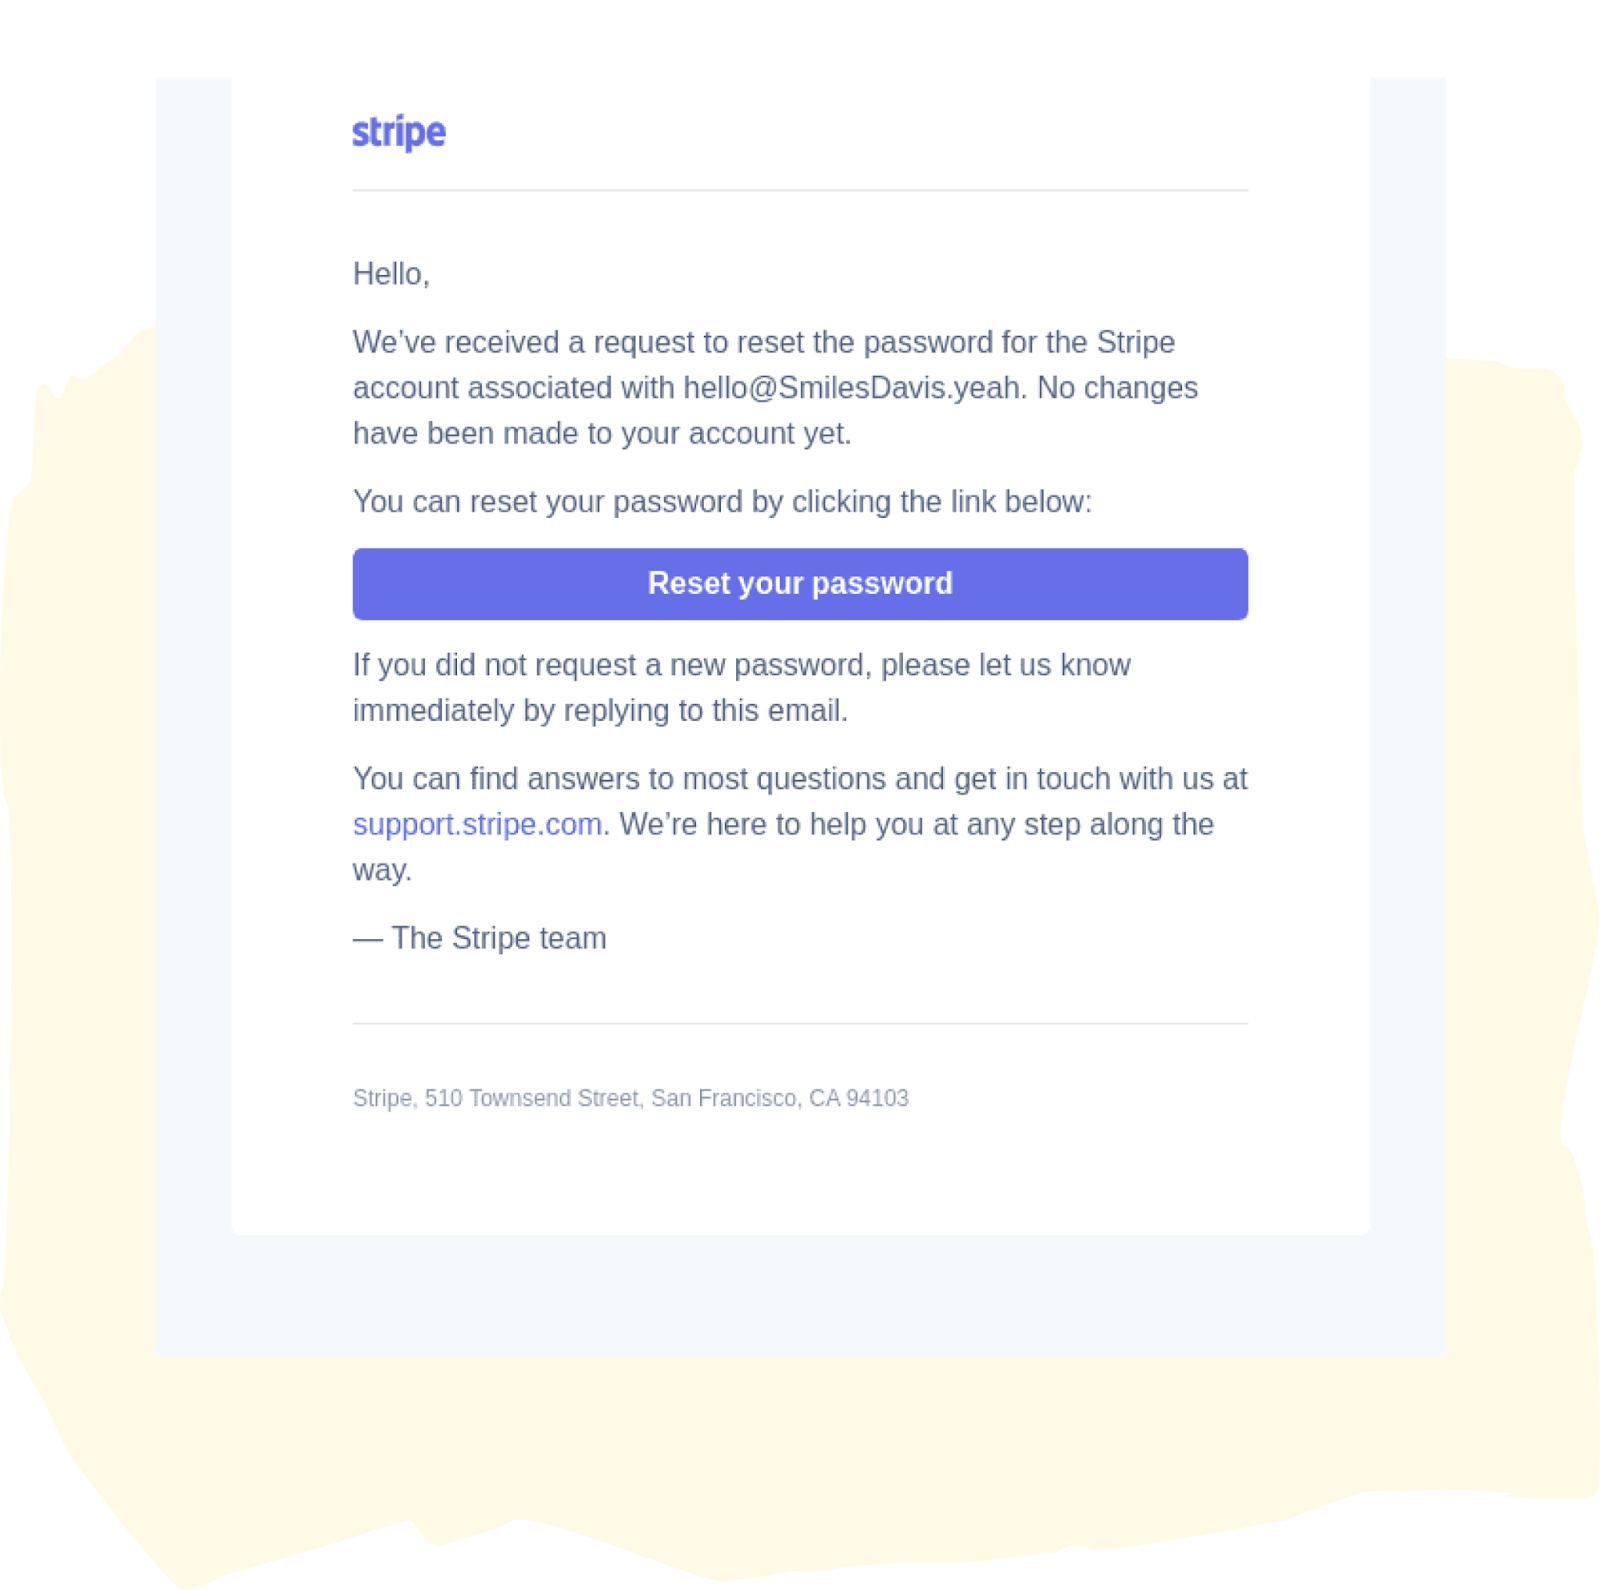 Stripe reset your password email